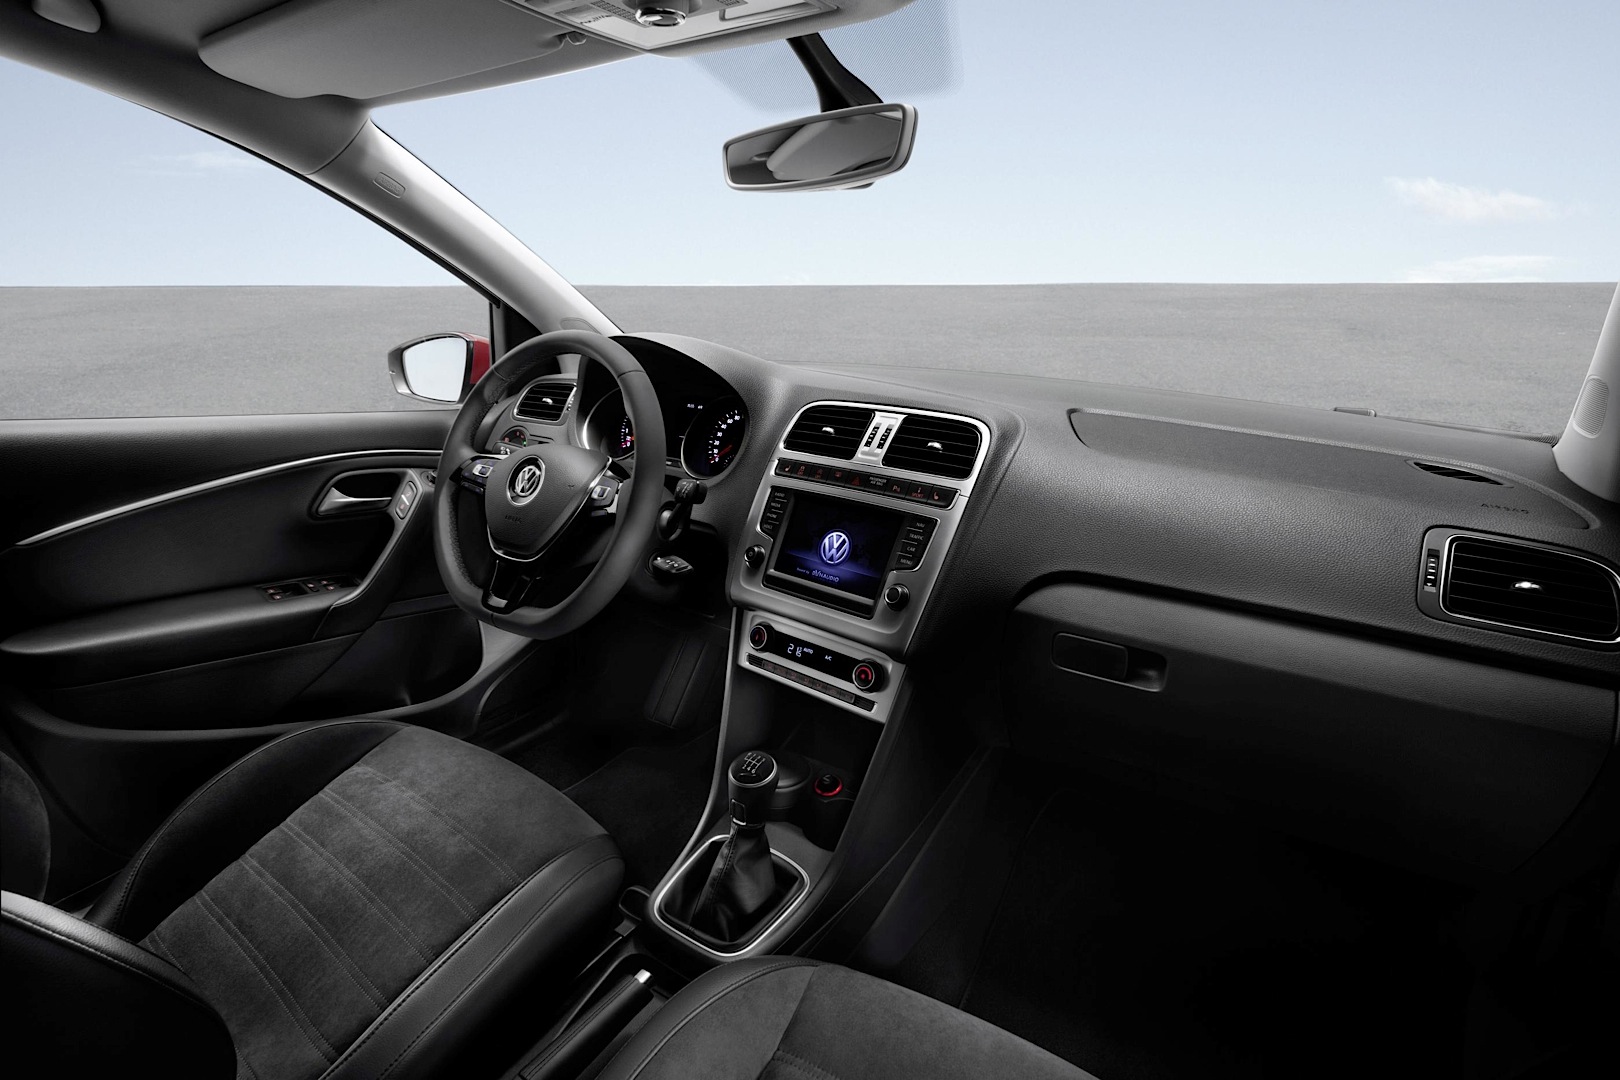 2014 Volkswagen Polo Facelift Interior and Updated Tech Revealed